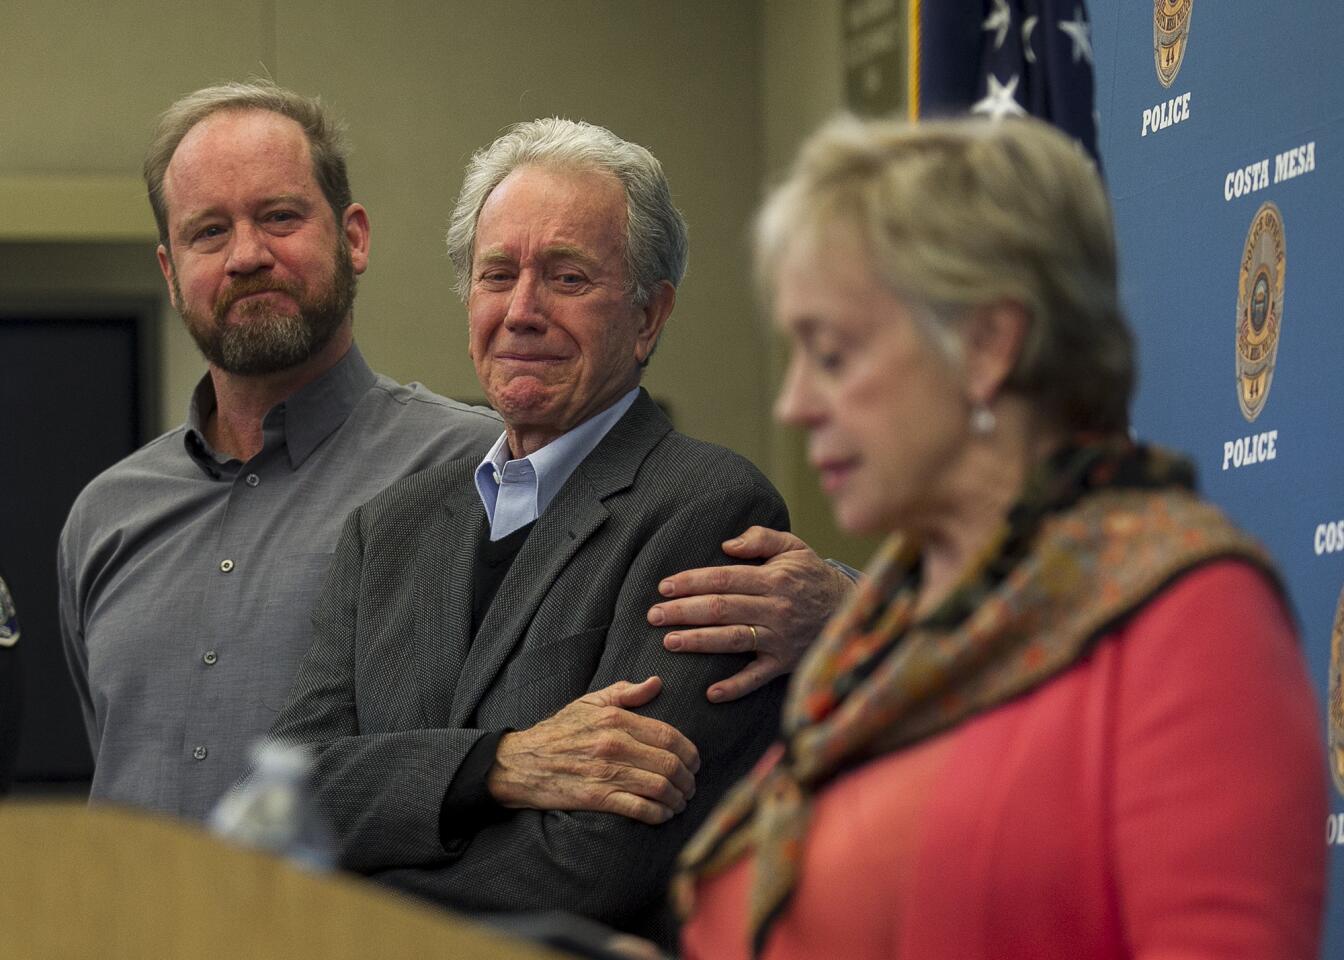 Scott Sudweeks, left, braces his father, Alan, as his mother, Sandy, speaks during a news conference about the 1997 cold-case rape and slaying of his sister Sunny Sudweeks at the Costa Mesa Police Department on Thursday.